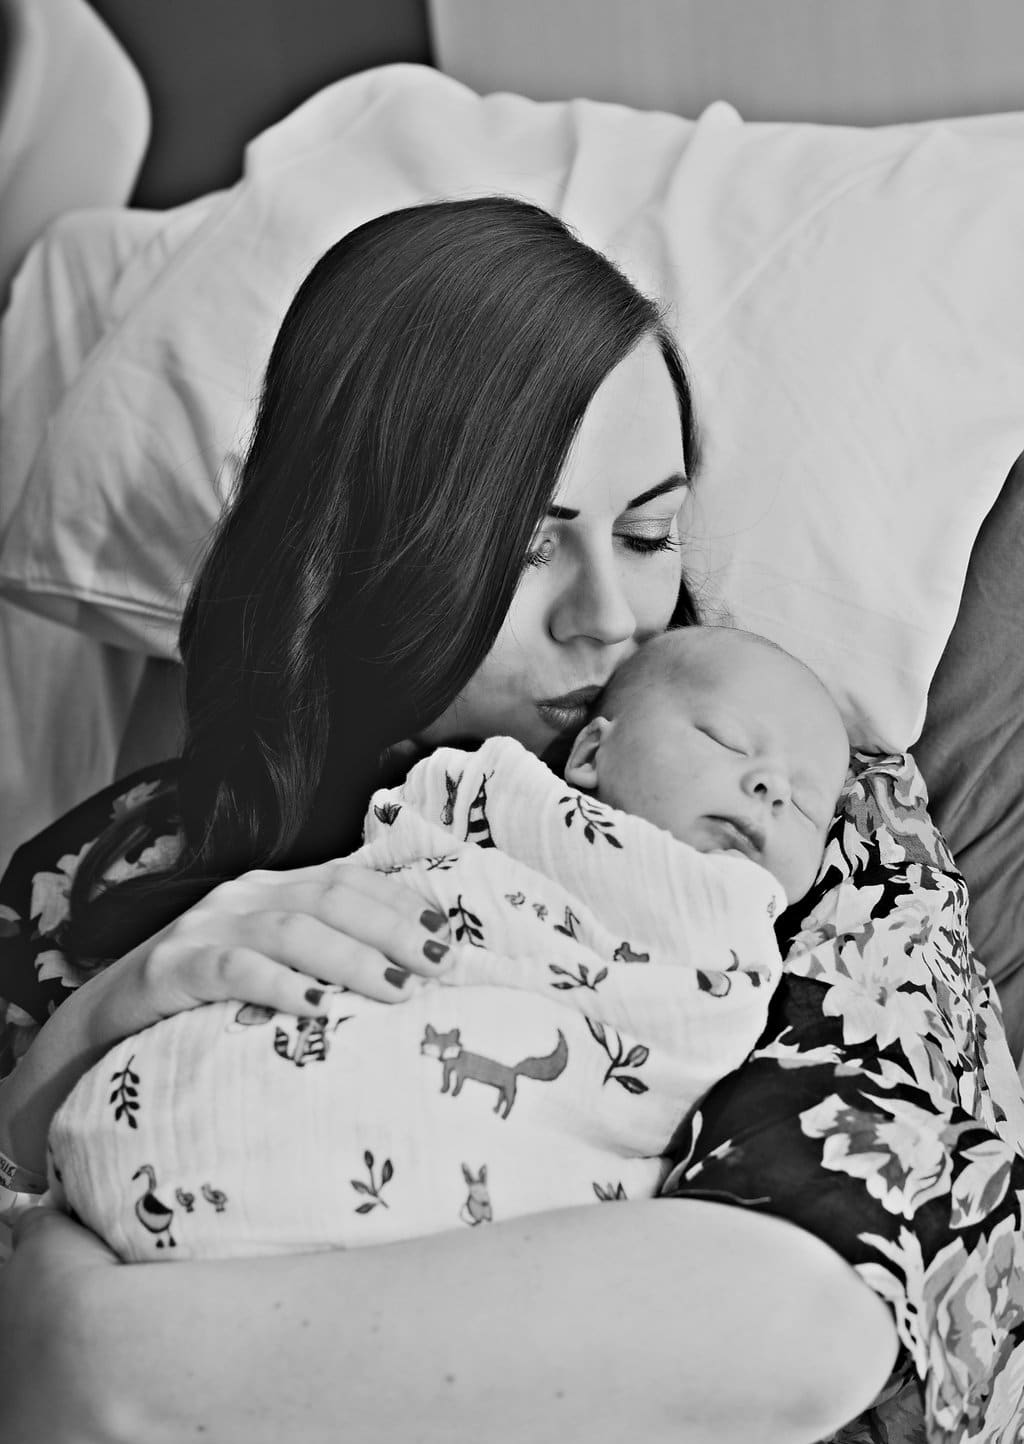 New mother pictures: birth story photography 